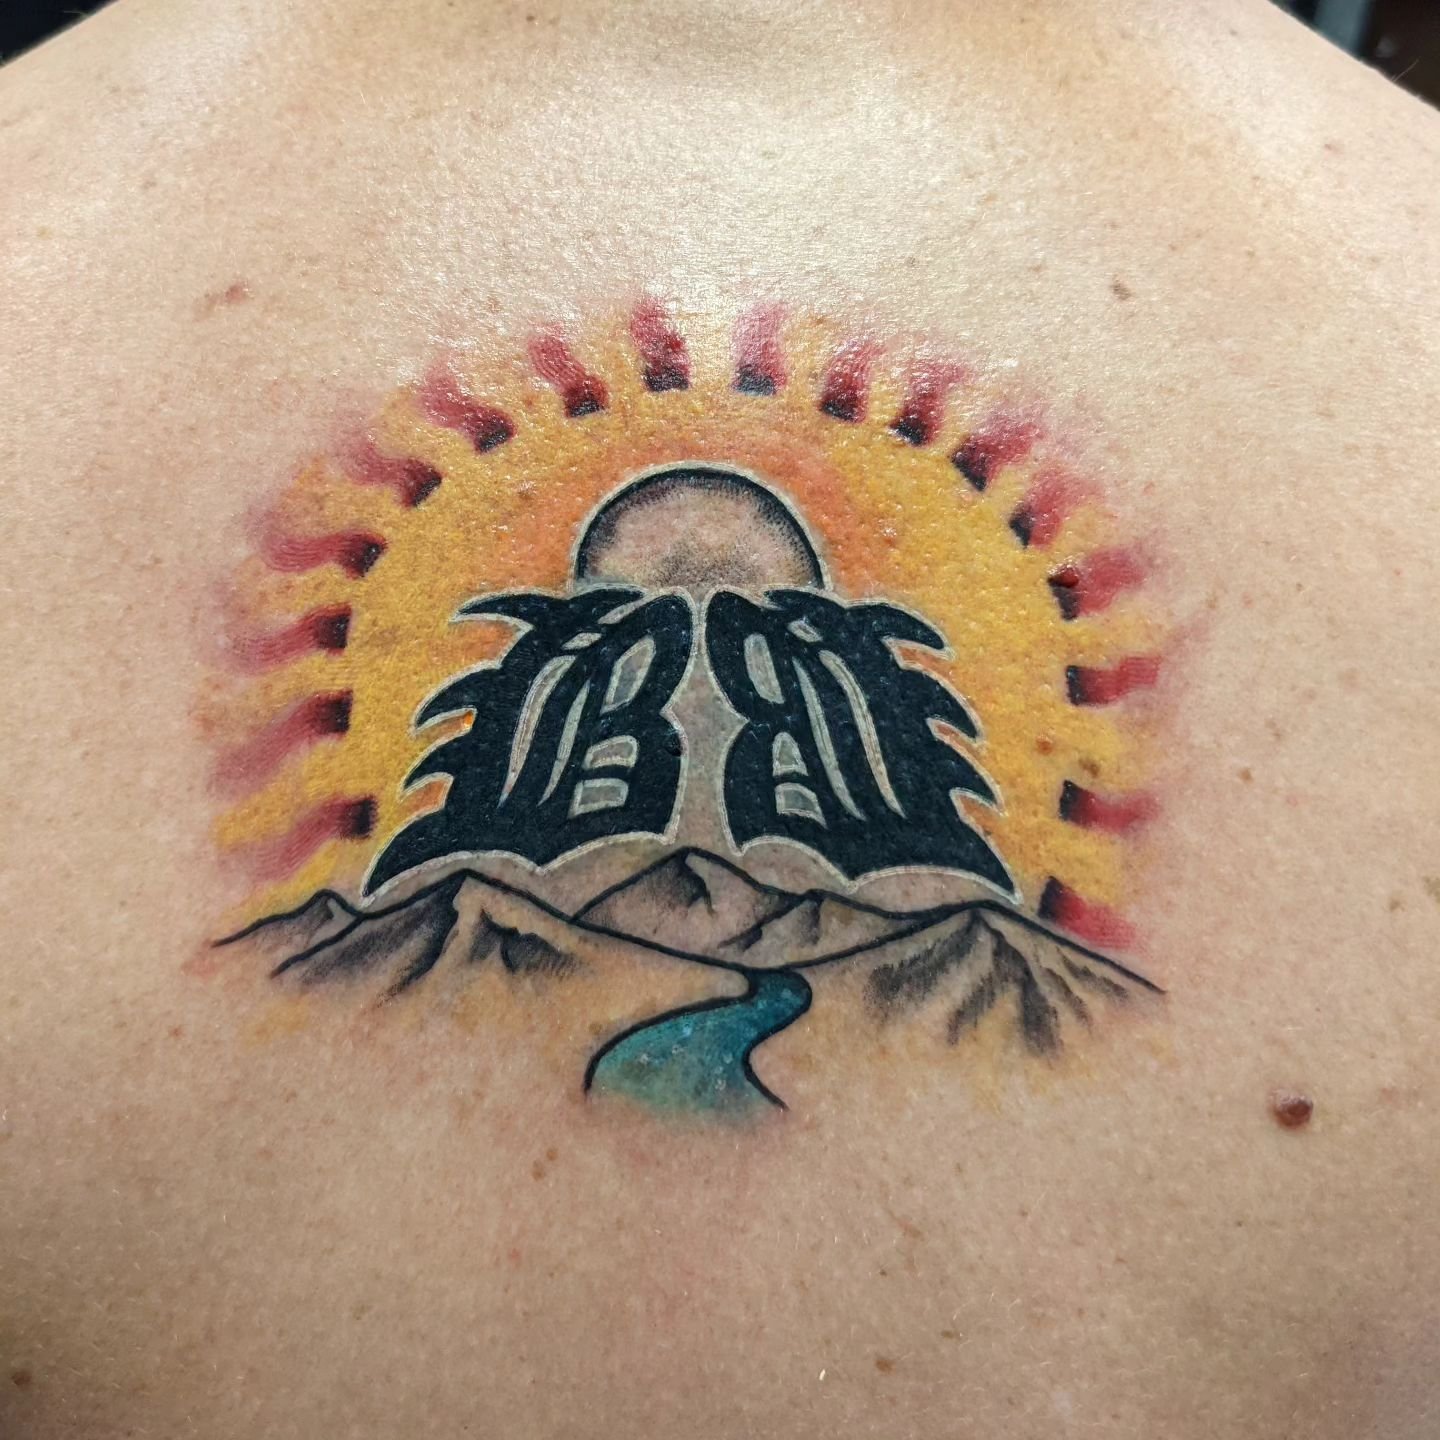 This refresh on a very old tattoo was a lot of fun to do! Wish I had been smart enough to take a before picture though. July '22

.
.
.
.
.

#tattoos #tattoorefresh #reworktattoo #B #mountaintattoo #colortattoo #rivertattoo #ladytattooers #coloradota